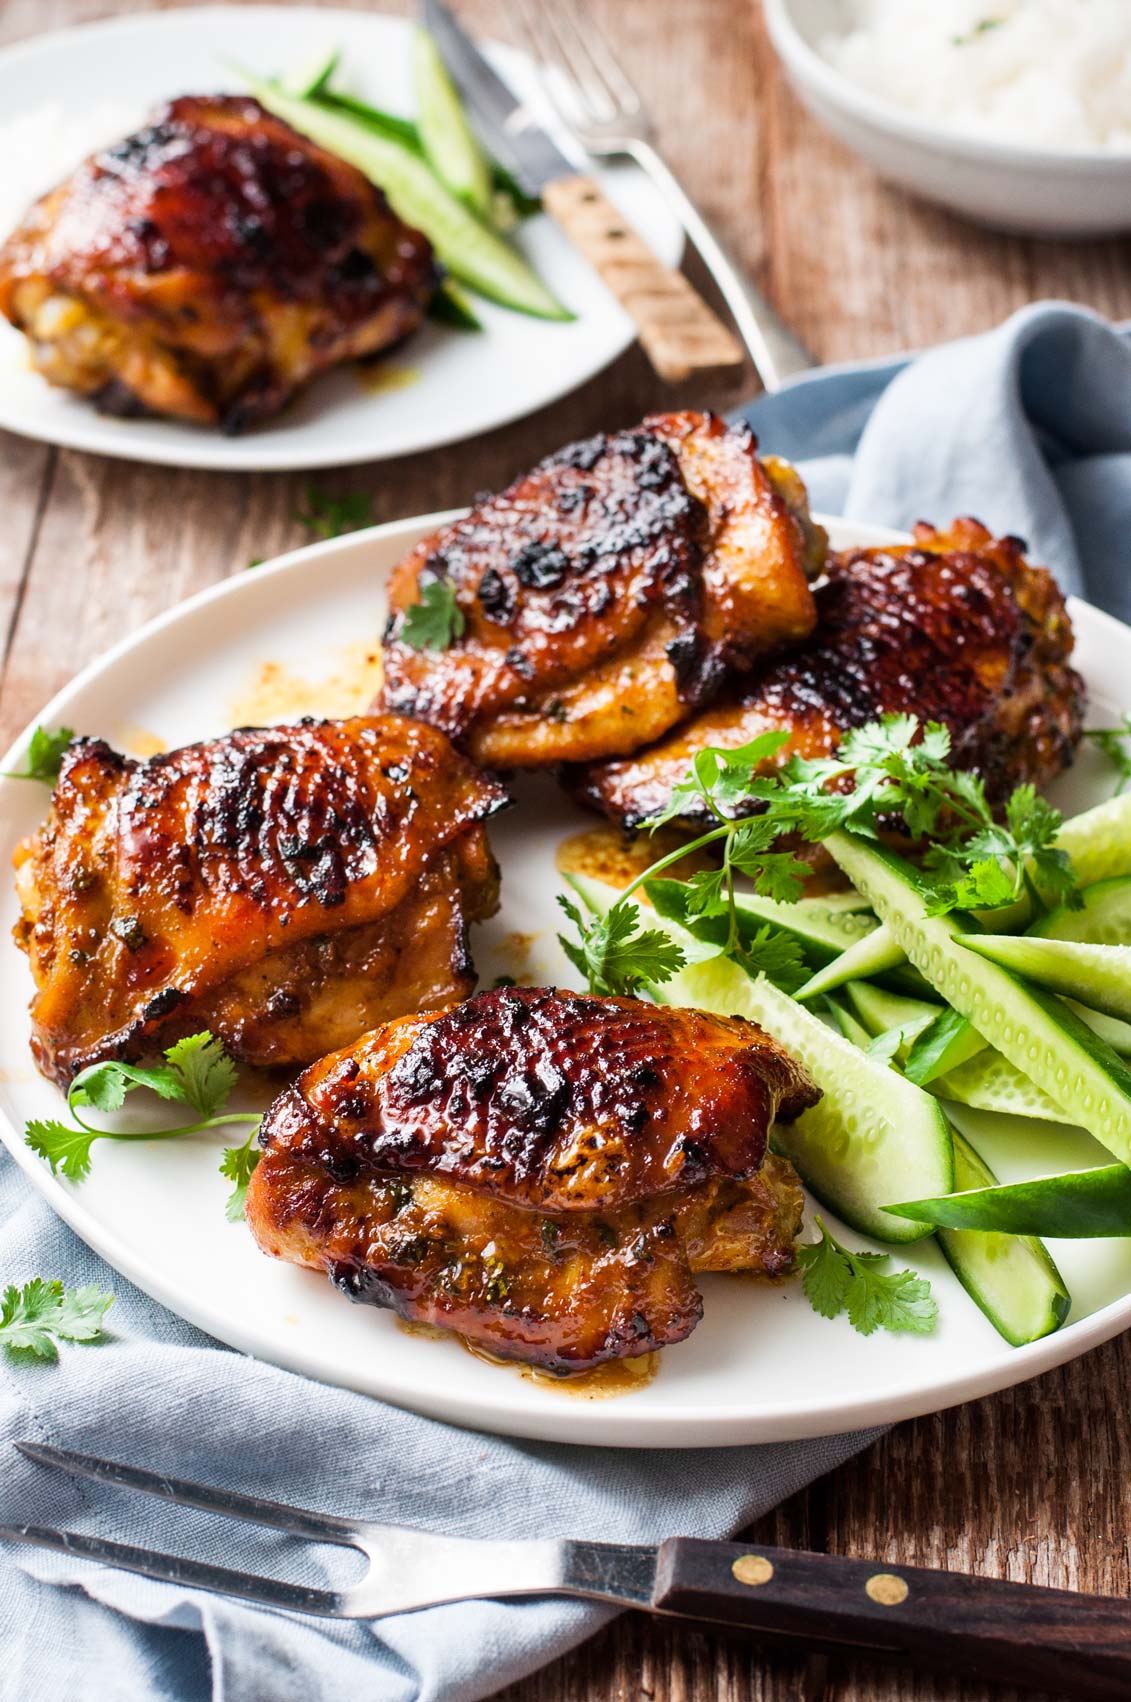 What are some spicy chicken marinade recipes?